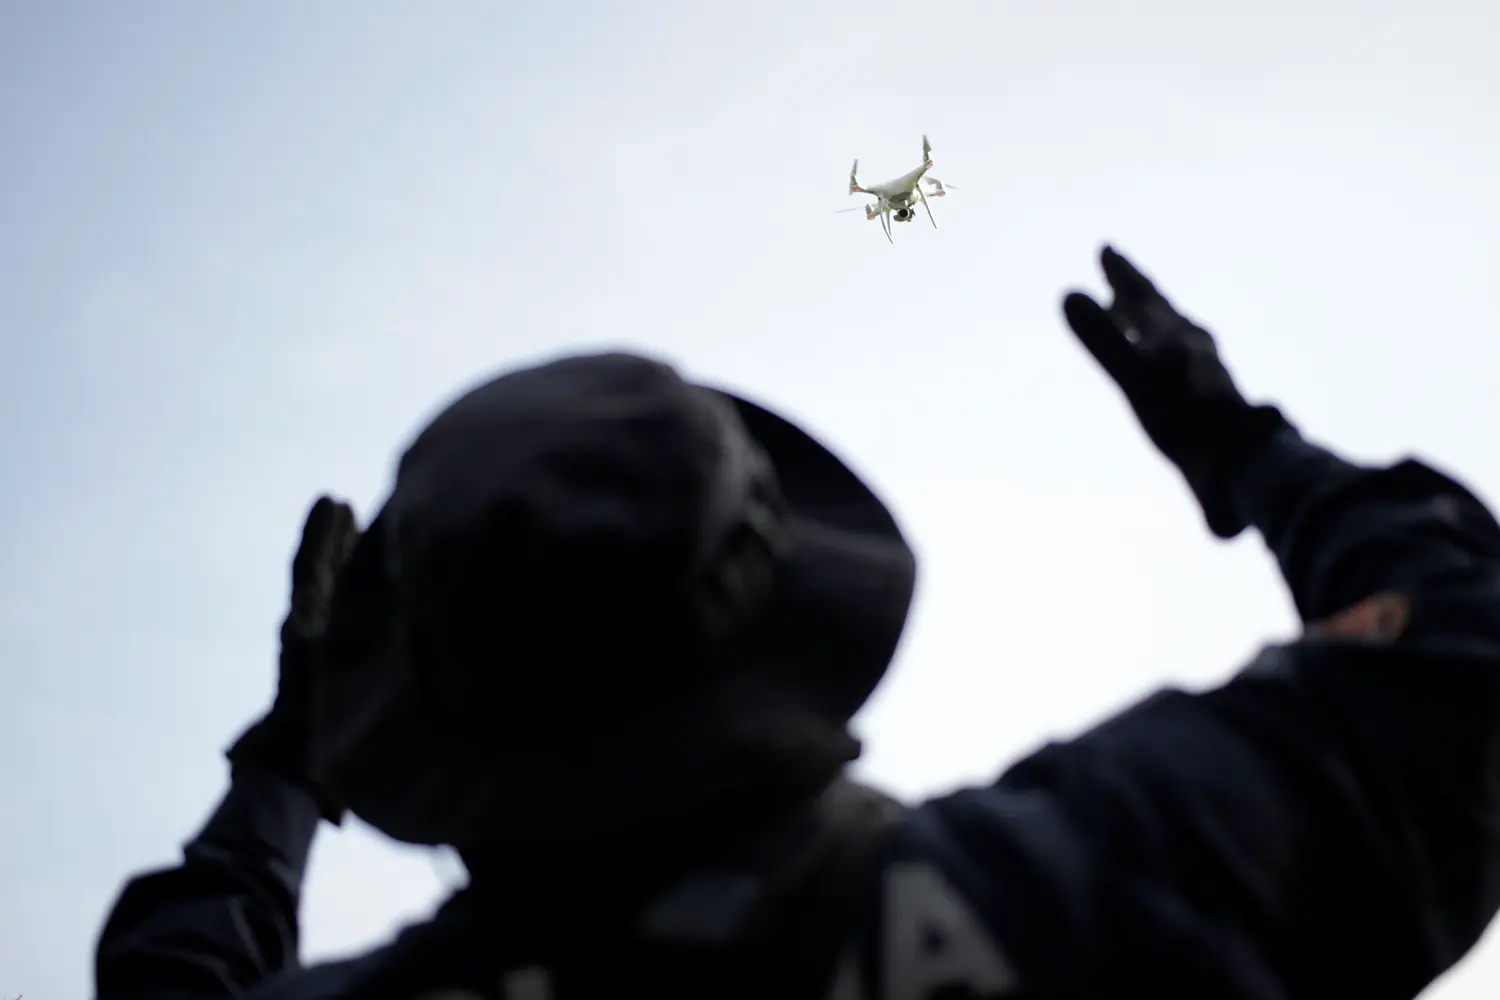 A police officer uses a drone during a search for skeletal remains and clothing at a plot of land, in the municipality of Hidalgo, on the outskirts of Monterrey, Mexico September 3, 2020. REUTERS/Daniel Becerril